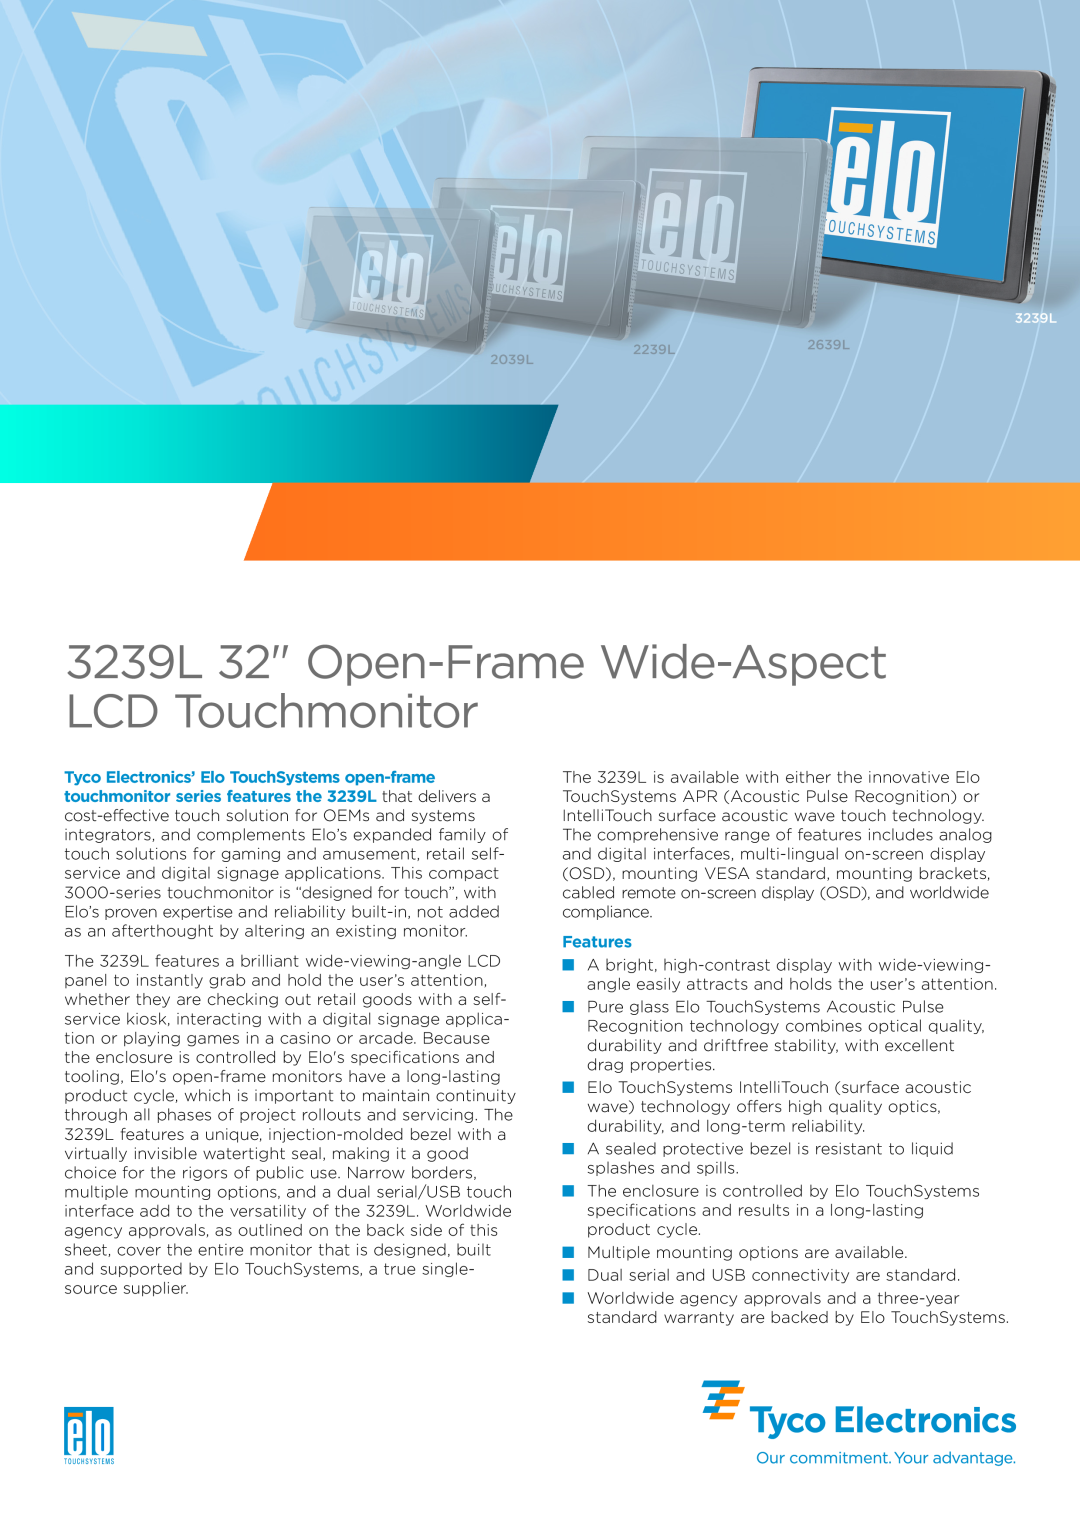 Elo TouchSystems specifications Features, 3239L 32 Open-Frame Wide-Aspect LCD Touchmonitor 